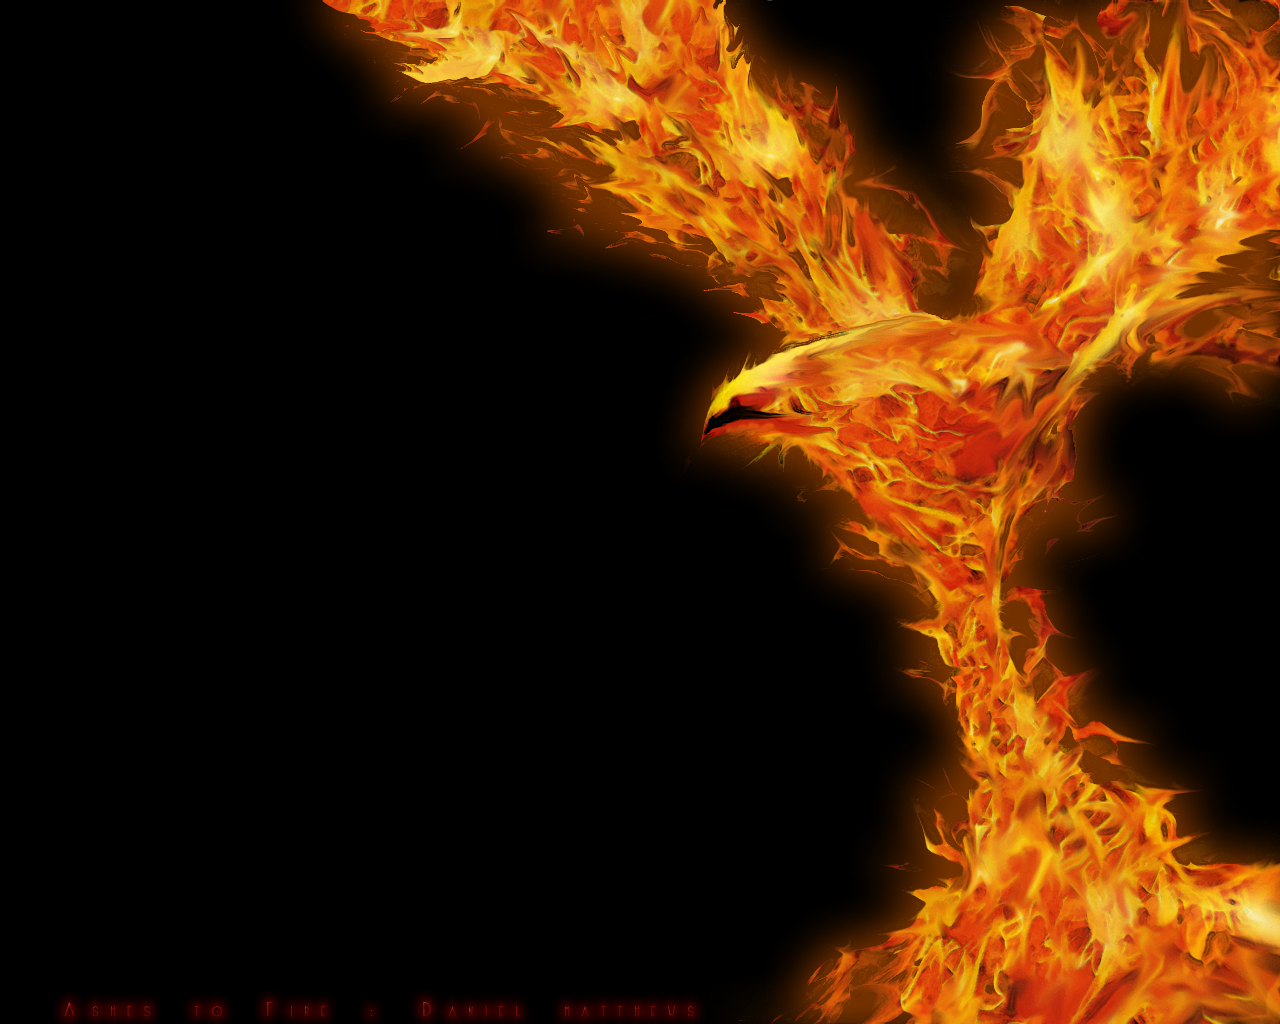 Phoenix Ashes To Fire By Spud3 On Deviantart